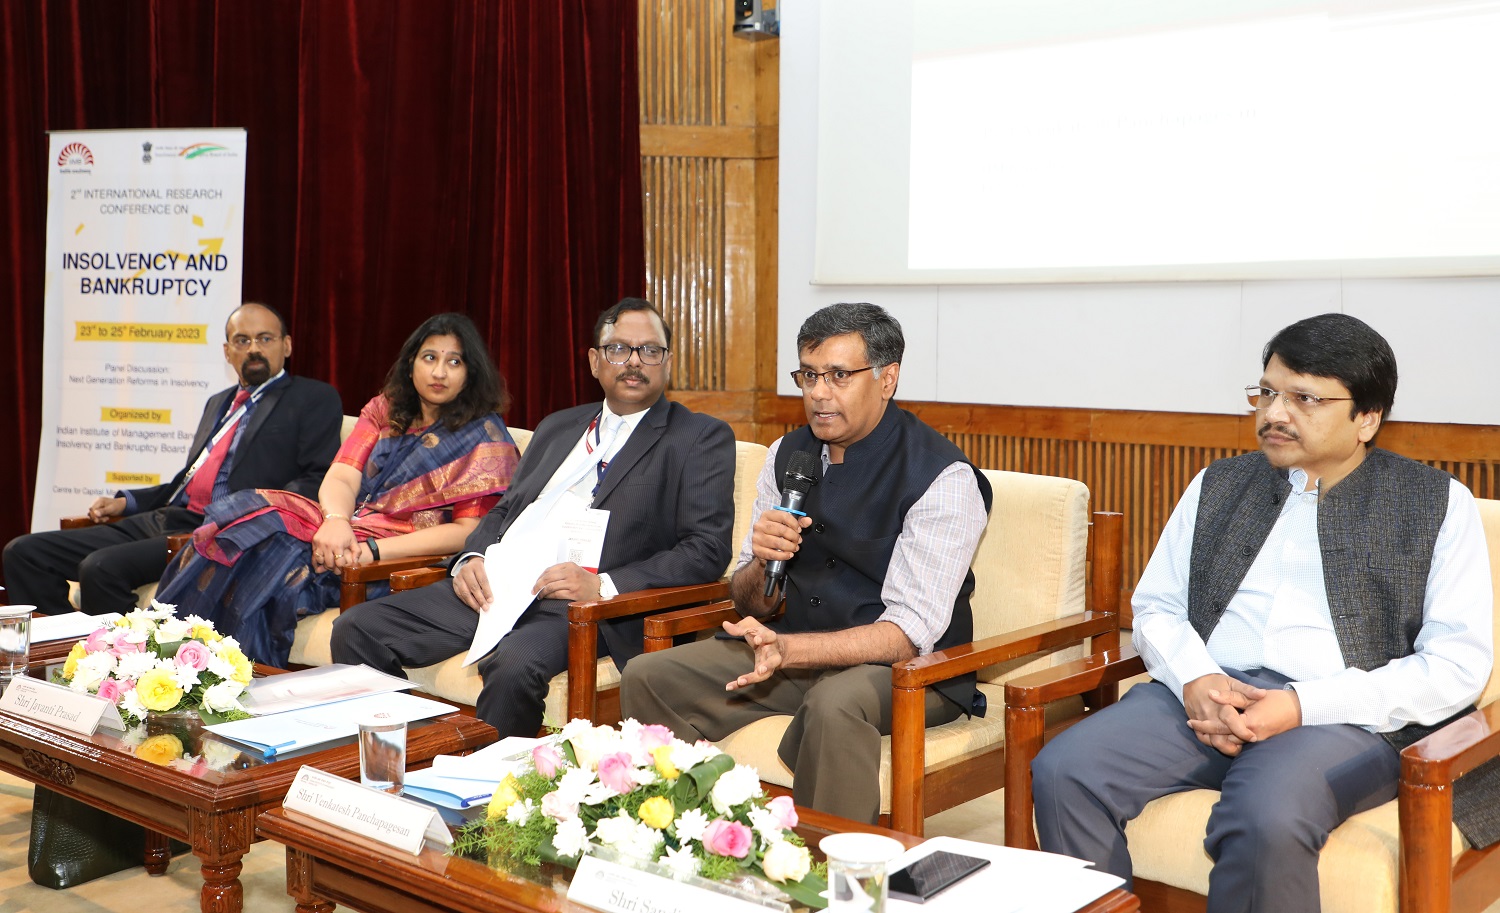 Prof. Venkatesh Panchapagesan (fourth from left), faculty in the Finance & Accounting area, IIMB, moderates the workshop on ‘Data-driven Insolvency Research’, organized as part of the 2nd International Research Conference on Insolvency and Bankruptcy, on 25th February 2023. Also present, from left to right, are: Debajyoti Ray Chaudhuri, MD and CEO, NeSL; Anita Shah Akella, Joint Secretary, Ministry of Corporate Affairs, GoI; Jayanti Prasad, Whole Time Member, IBBI, and Sandip Garg, Executive Director, IBBI.